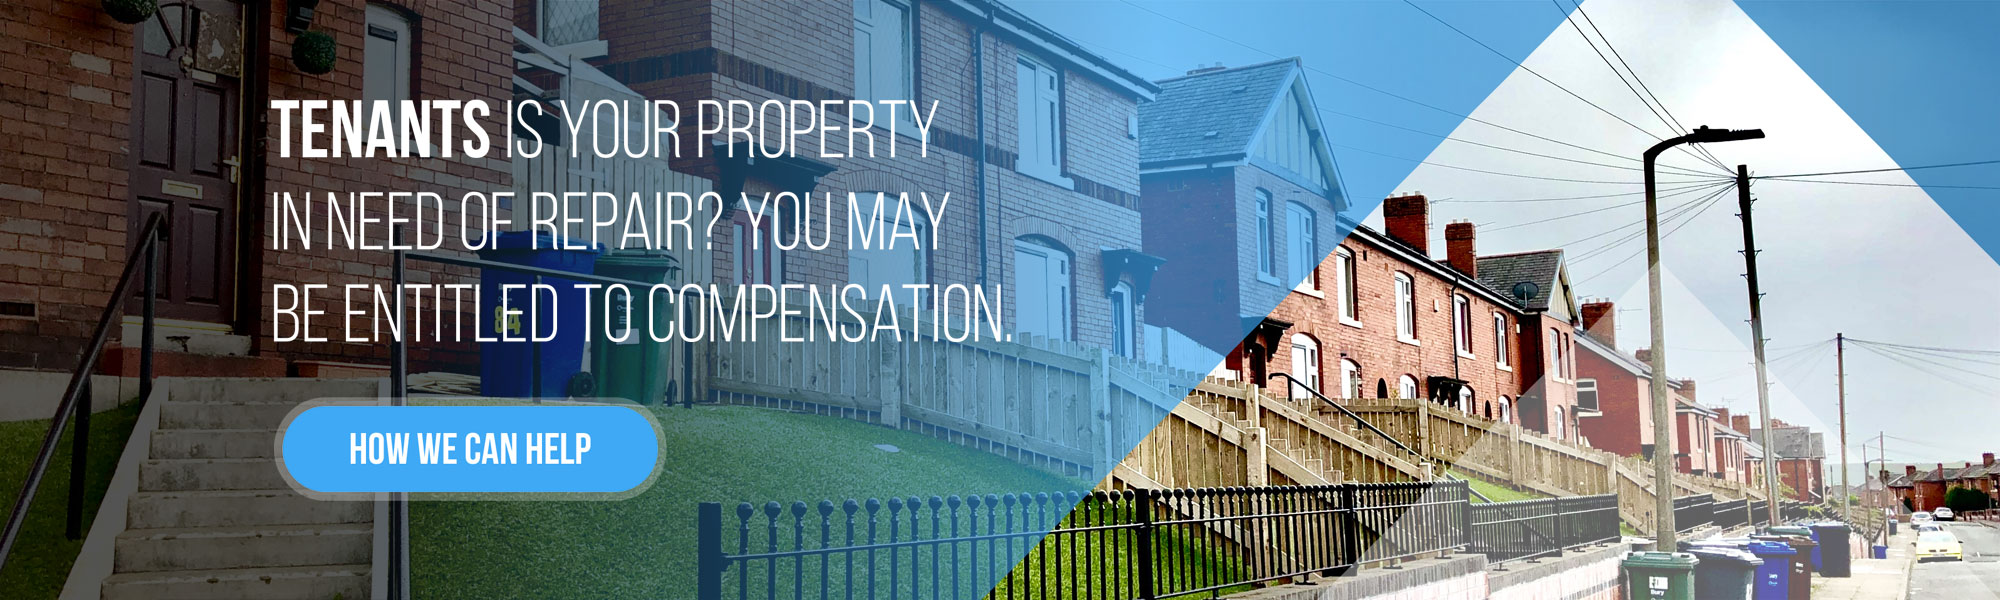 Tenants - Is your property in need of repair? You may be entitled to compensation. How we can help